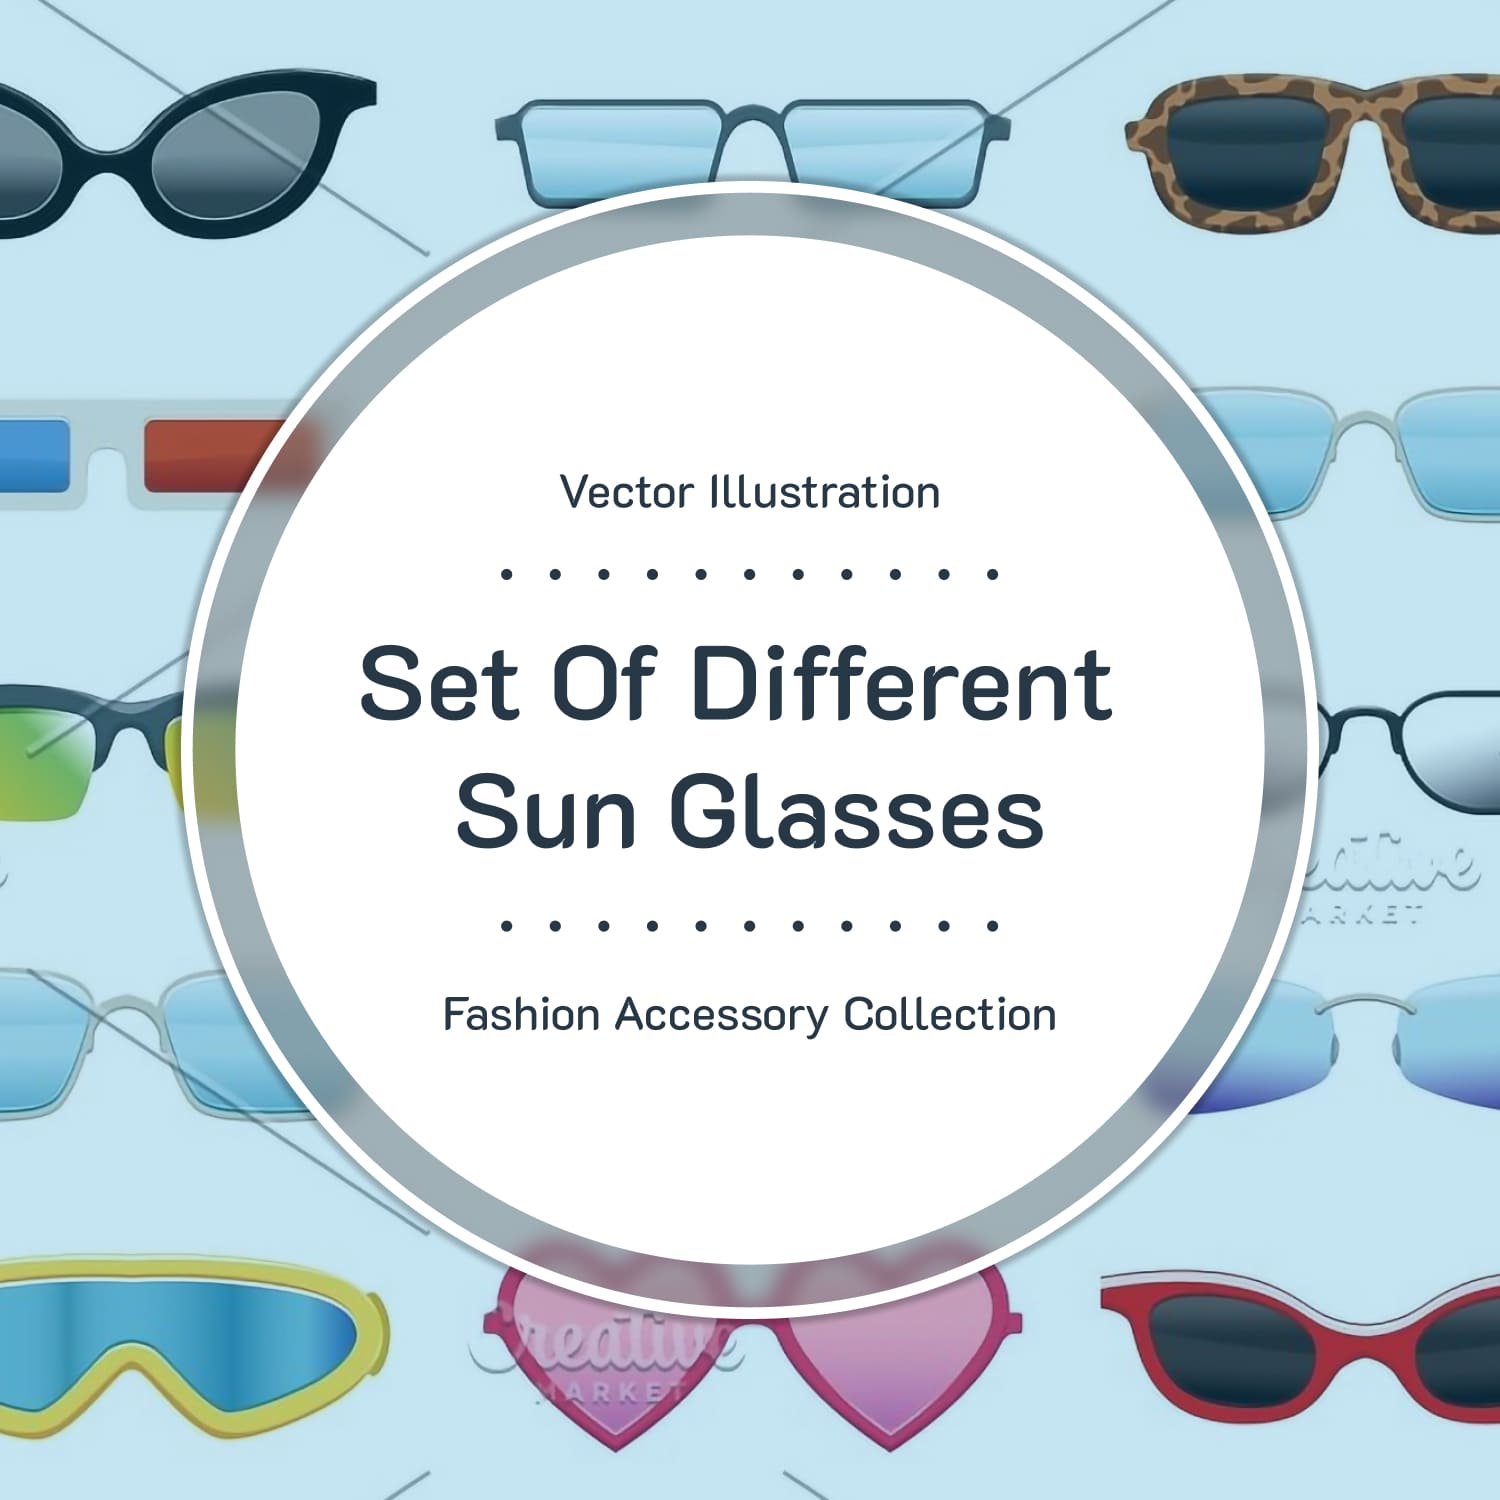 Set of different sun glasses main cover.